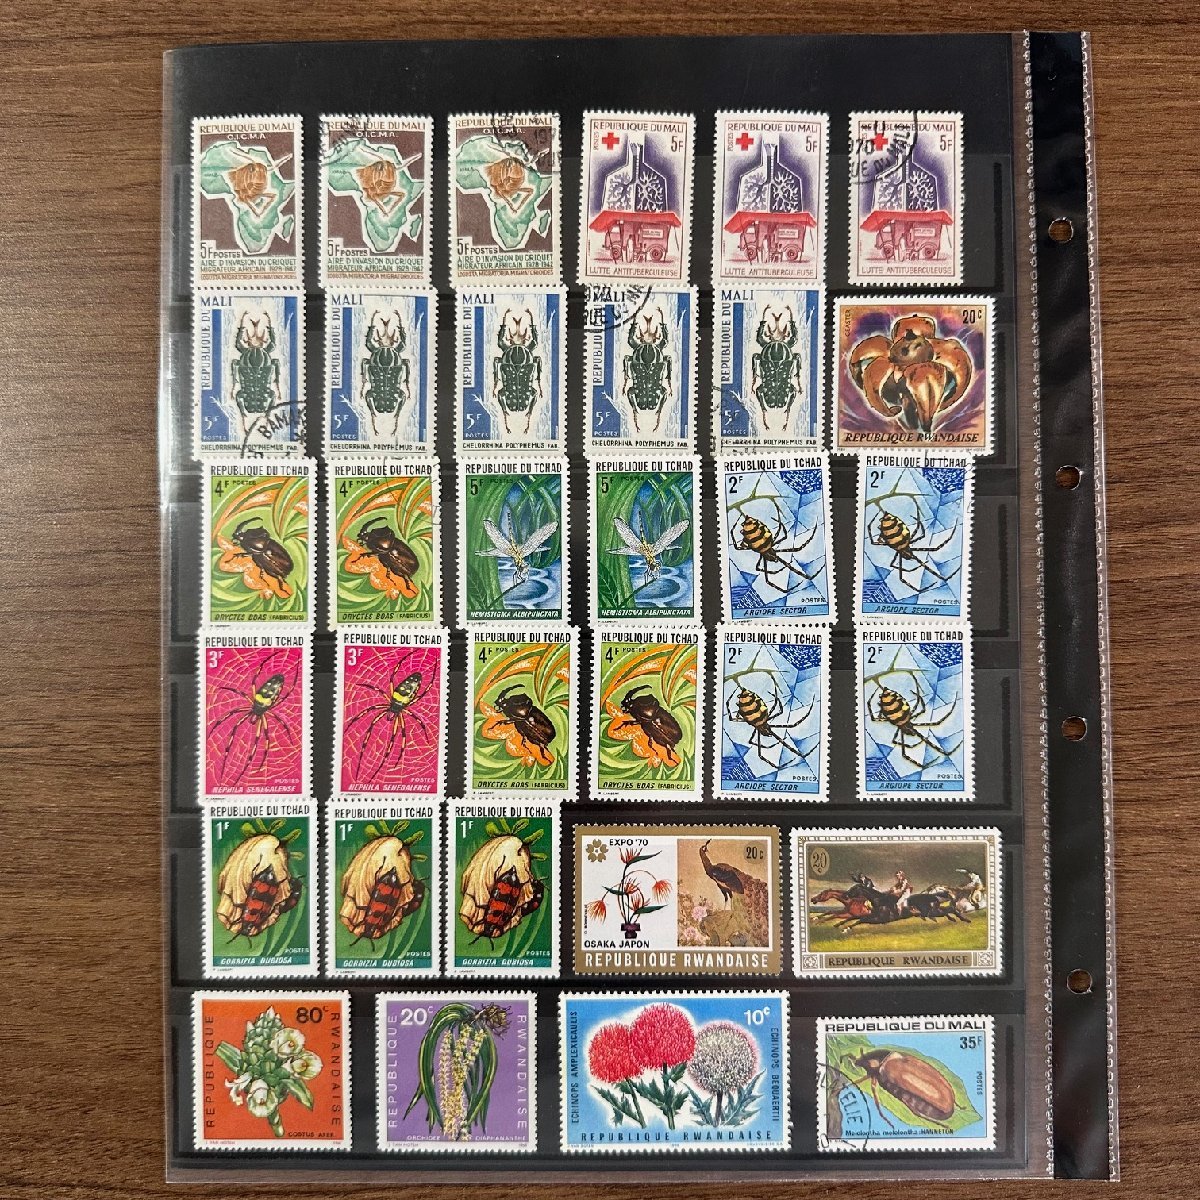 ** foreign stamp ** rare foreign stamp various unused . seal treasure searching collection house discharge goods 99